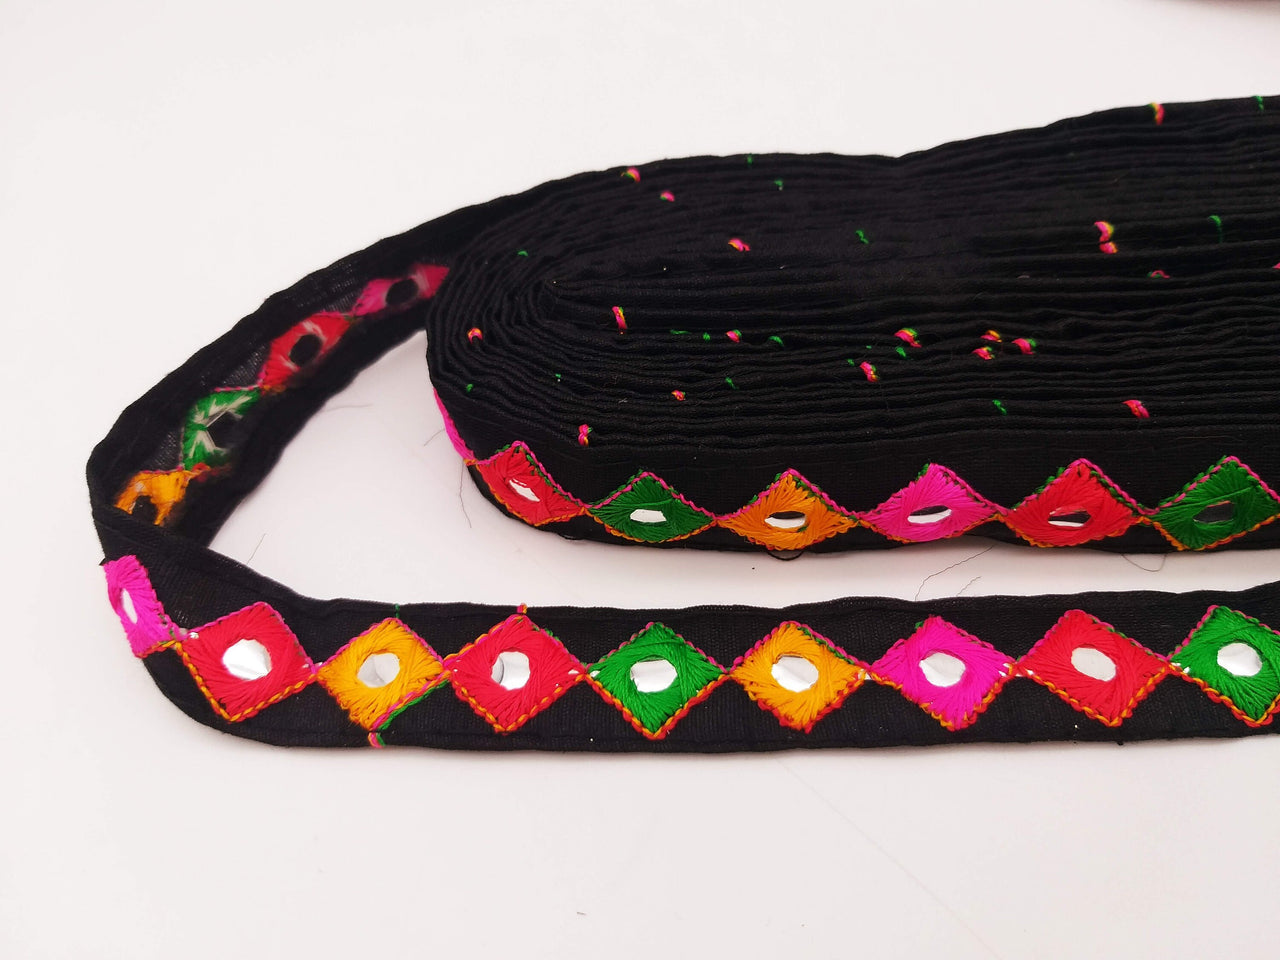 Wholesale Black Cotton Fabric Mirrored Trim With Embroidery In Yellow, Fuchsia Pink, Red & Green Threads